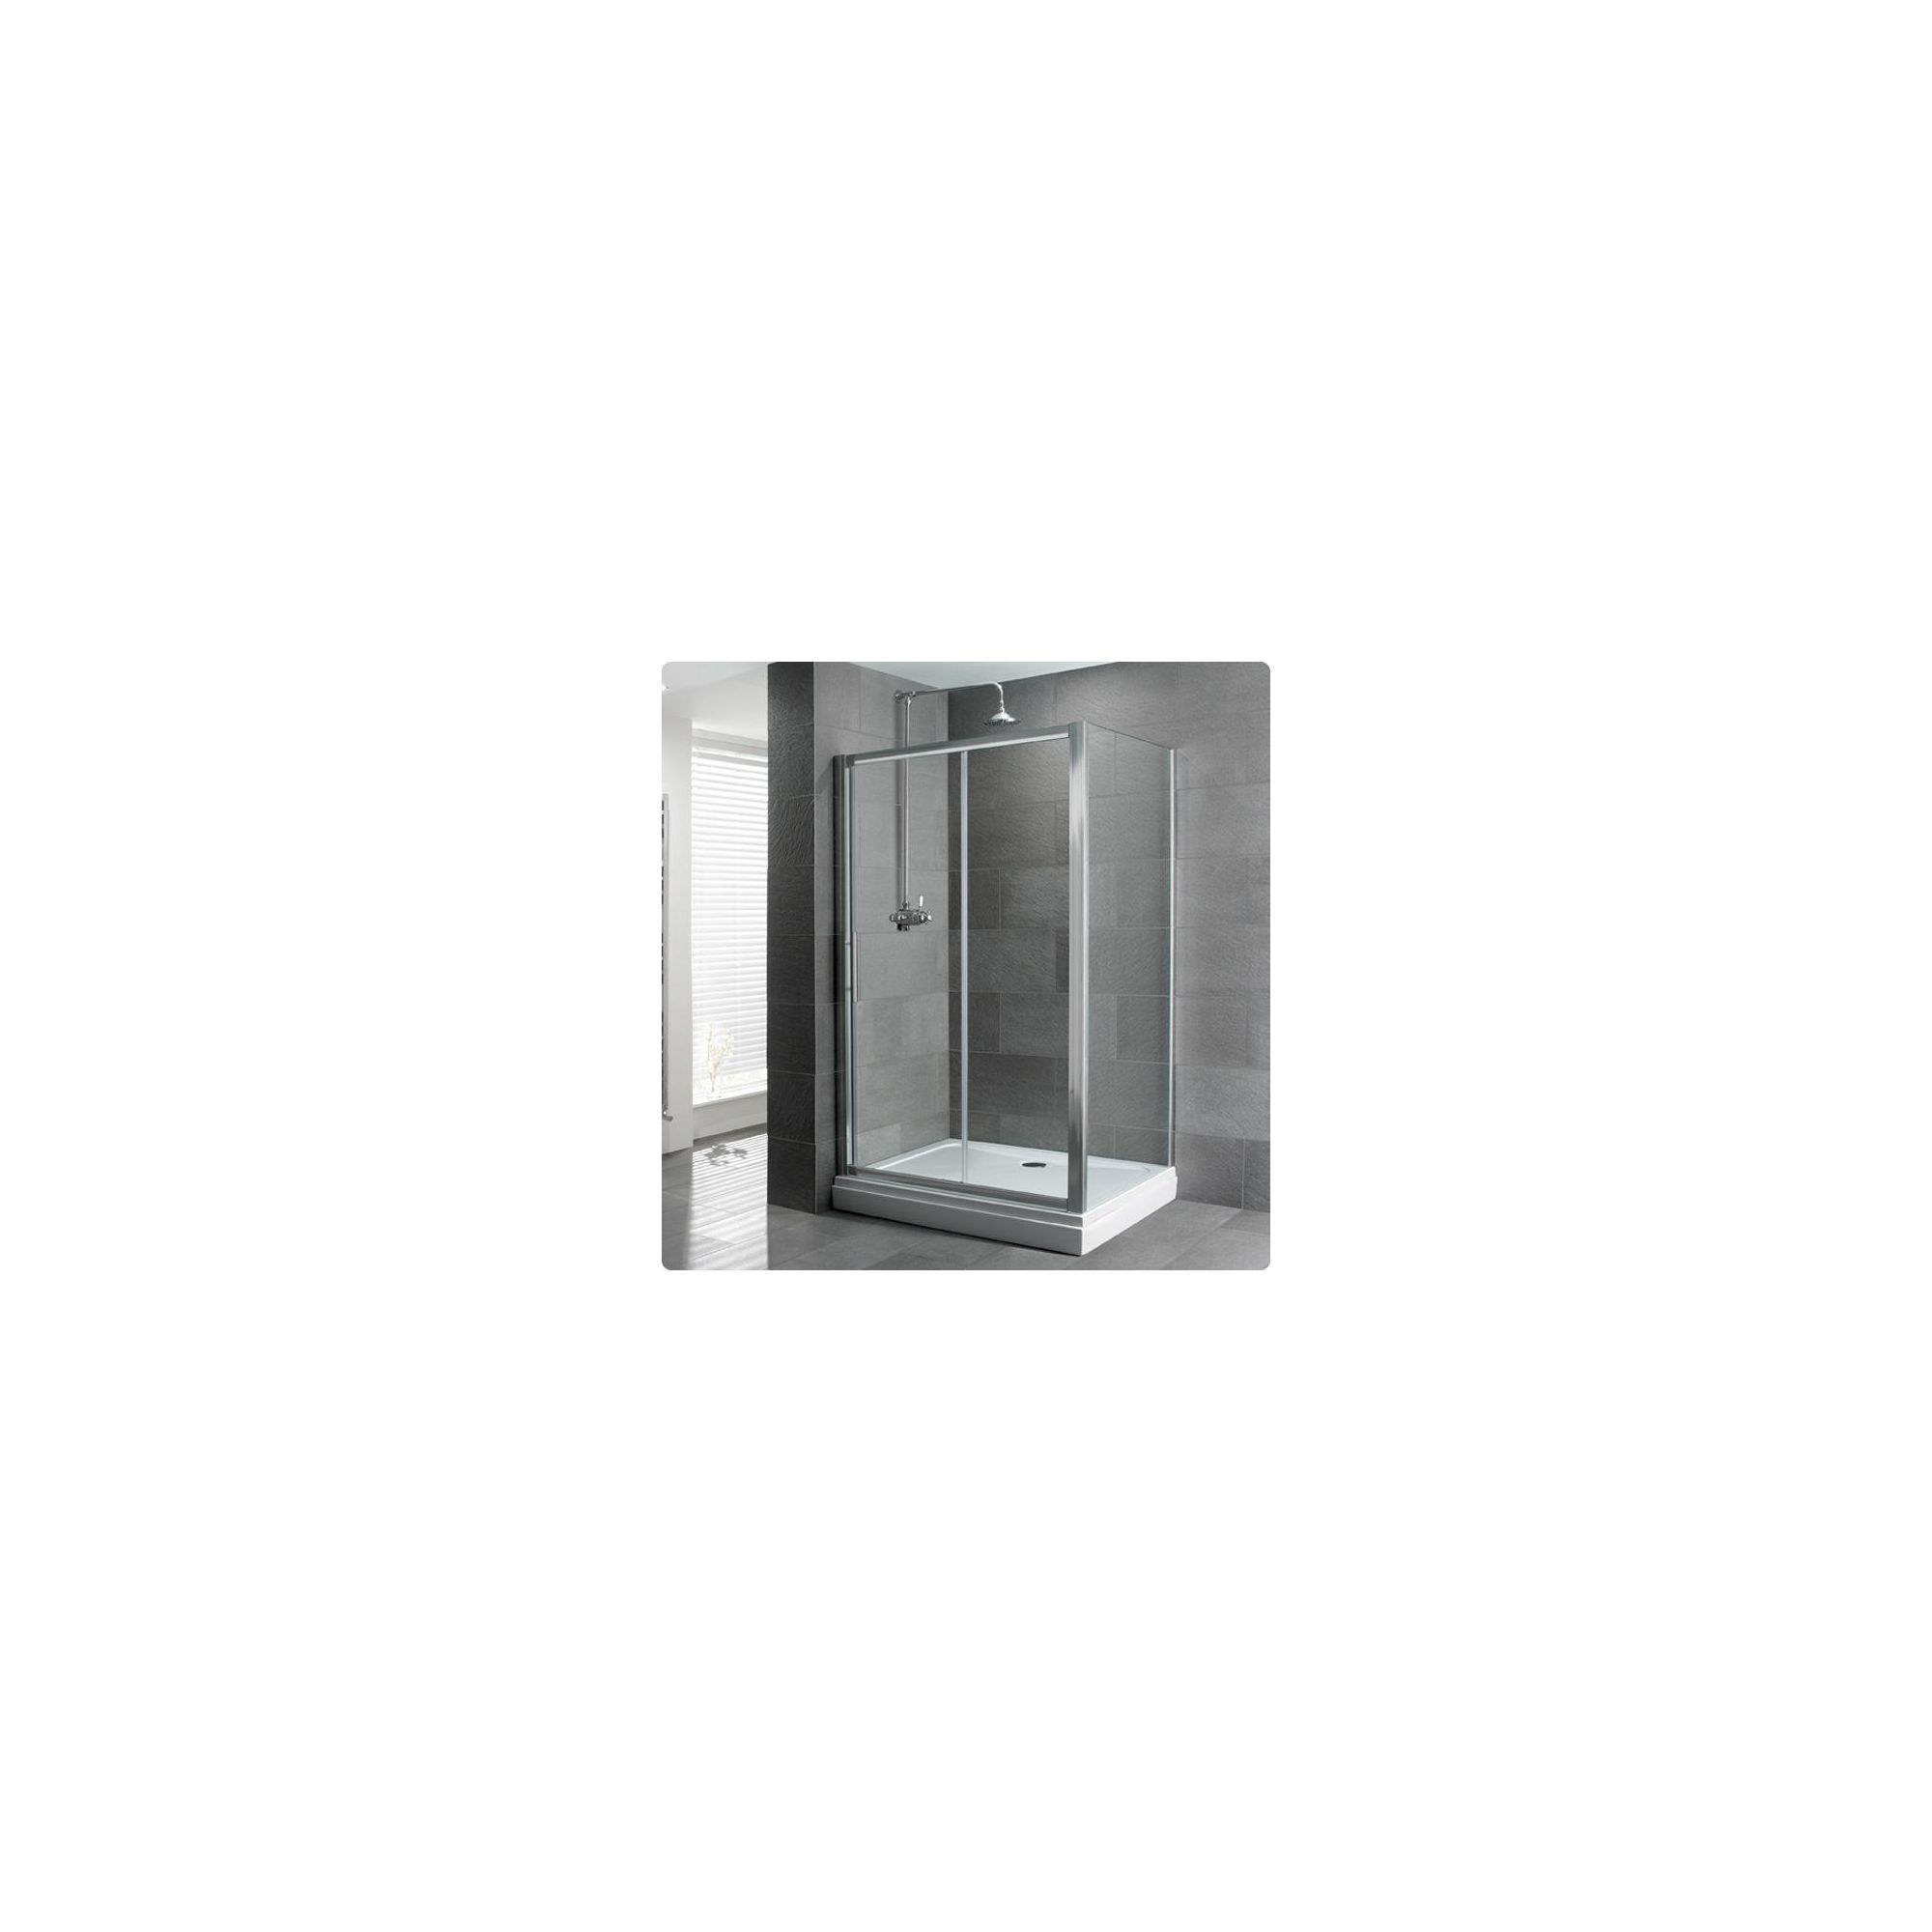 Duchy Select Silver Single Sliding Door Shower Enclosure, 1000mm x 700mm, Standard Tray, 6mm Glass at Tesco Direct